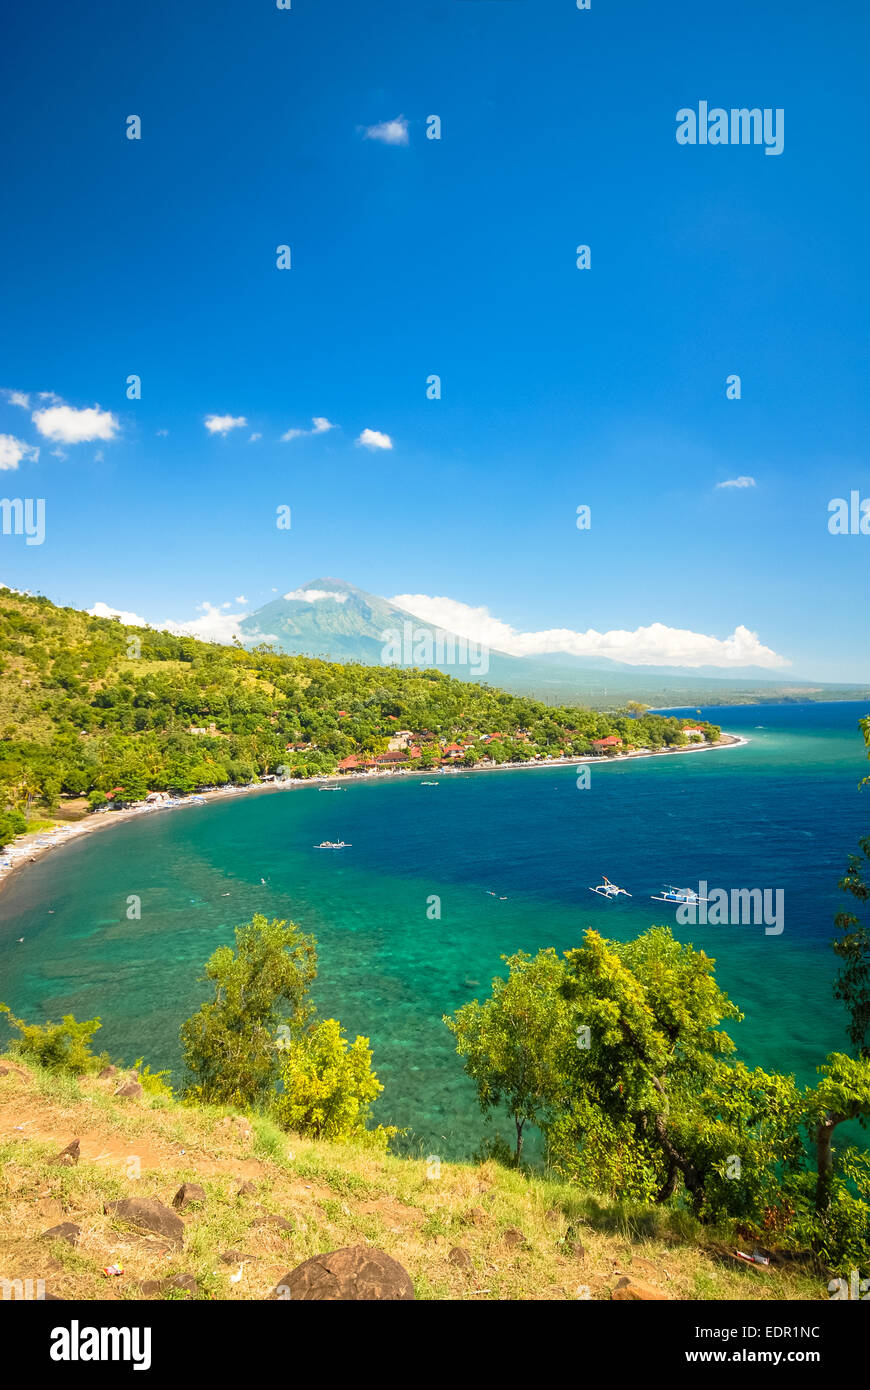 view at the bay of amed at bali indonesia Stock Photo